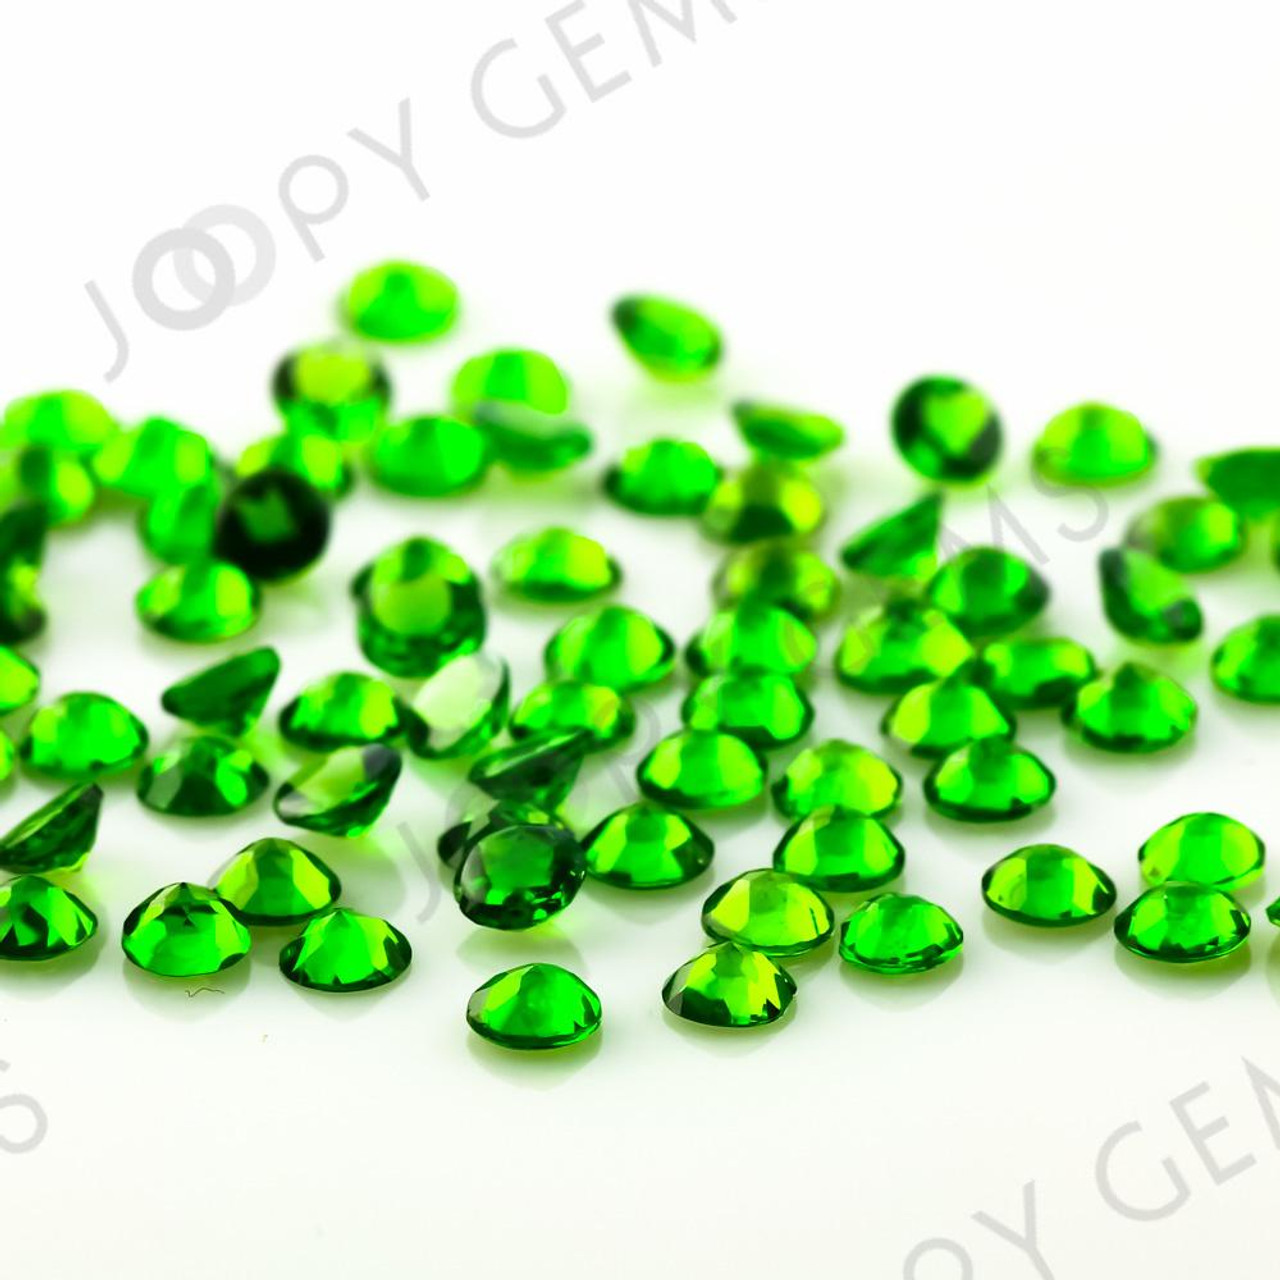 Natural Chrome Diopside Round Faceted Cut Loose Gemstone 3 mm lot